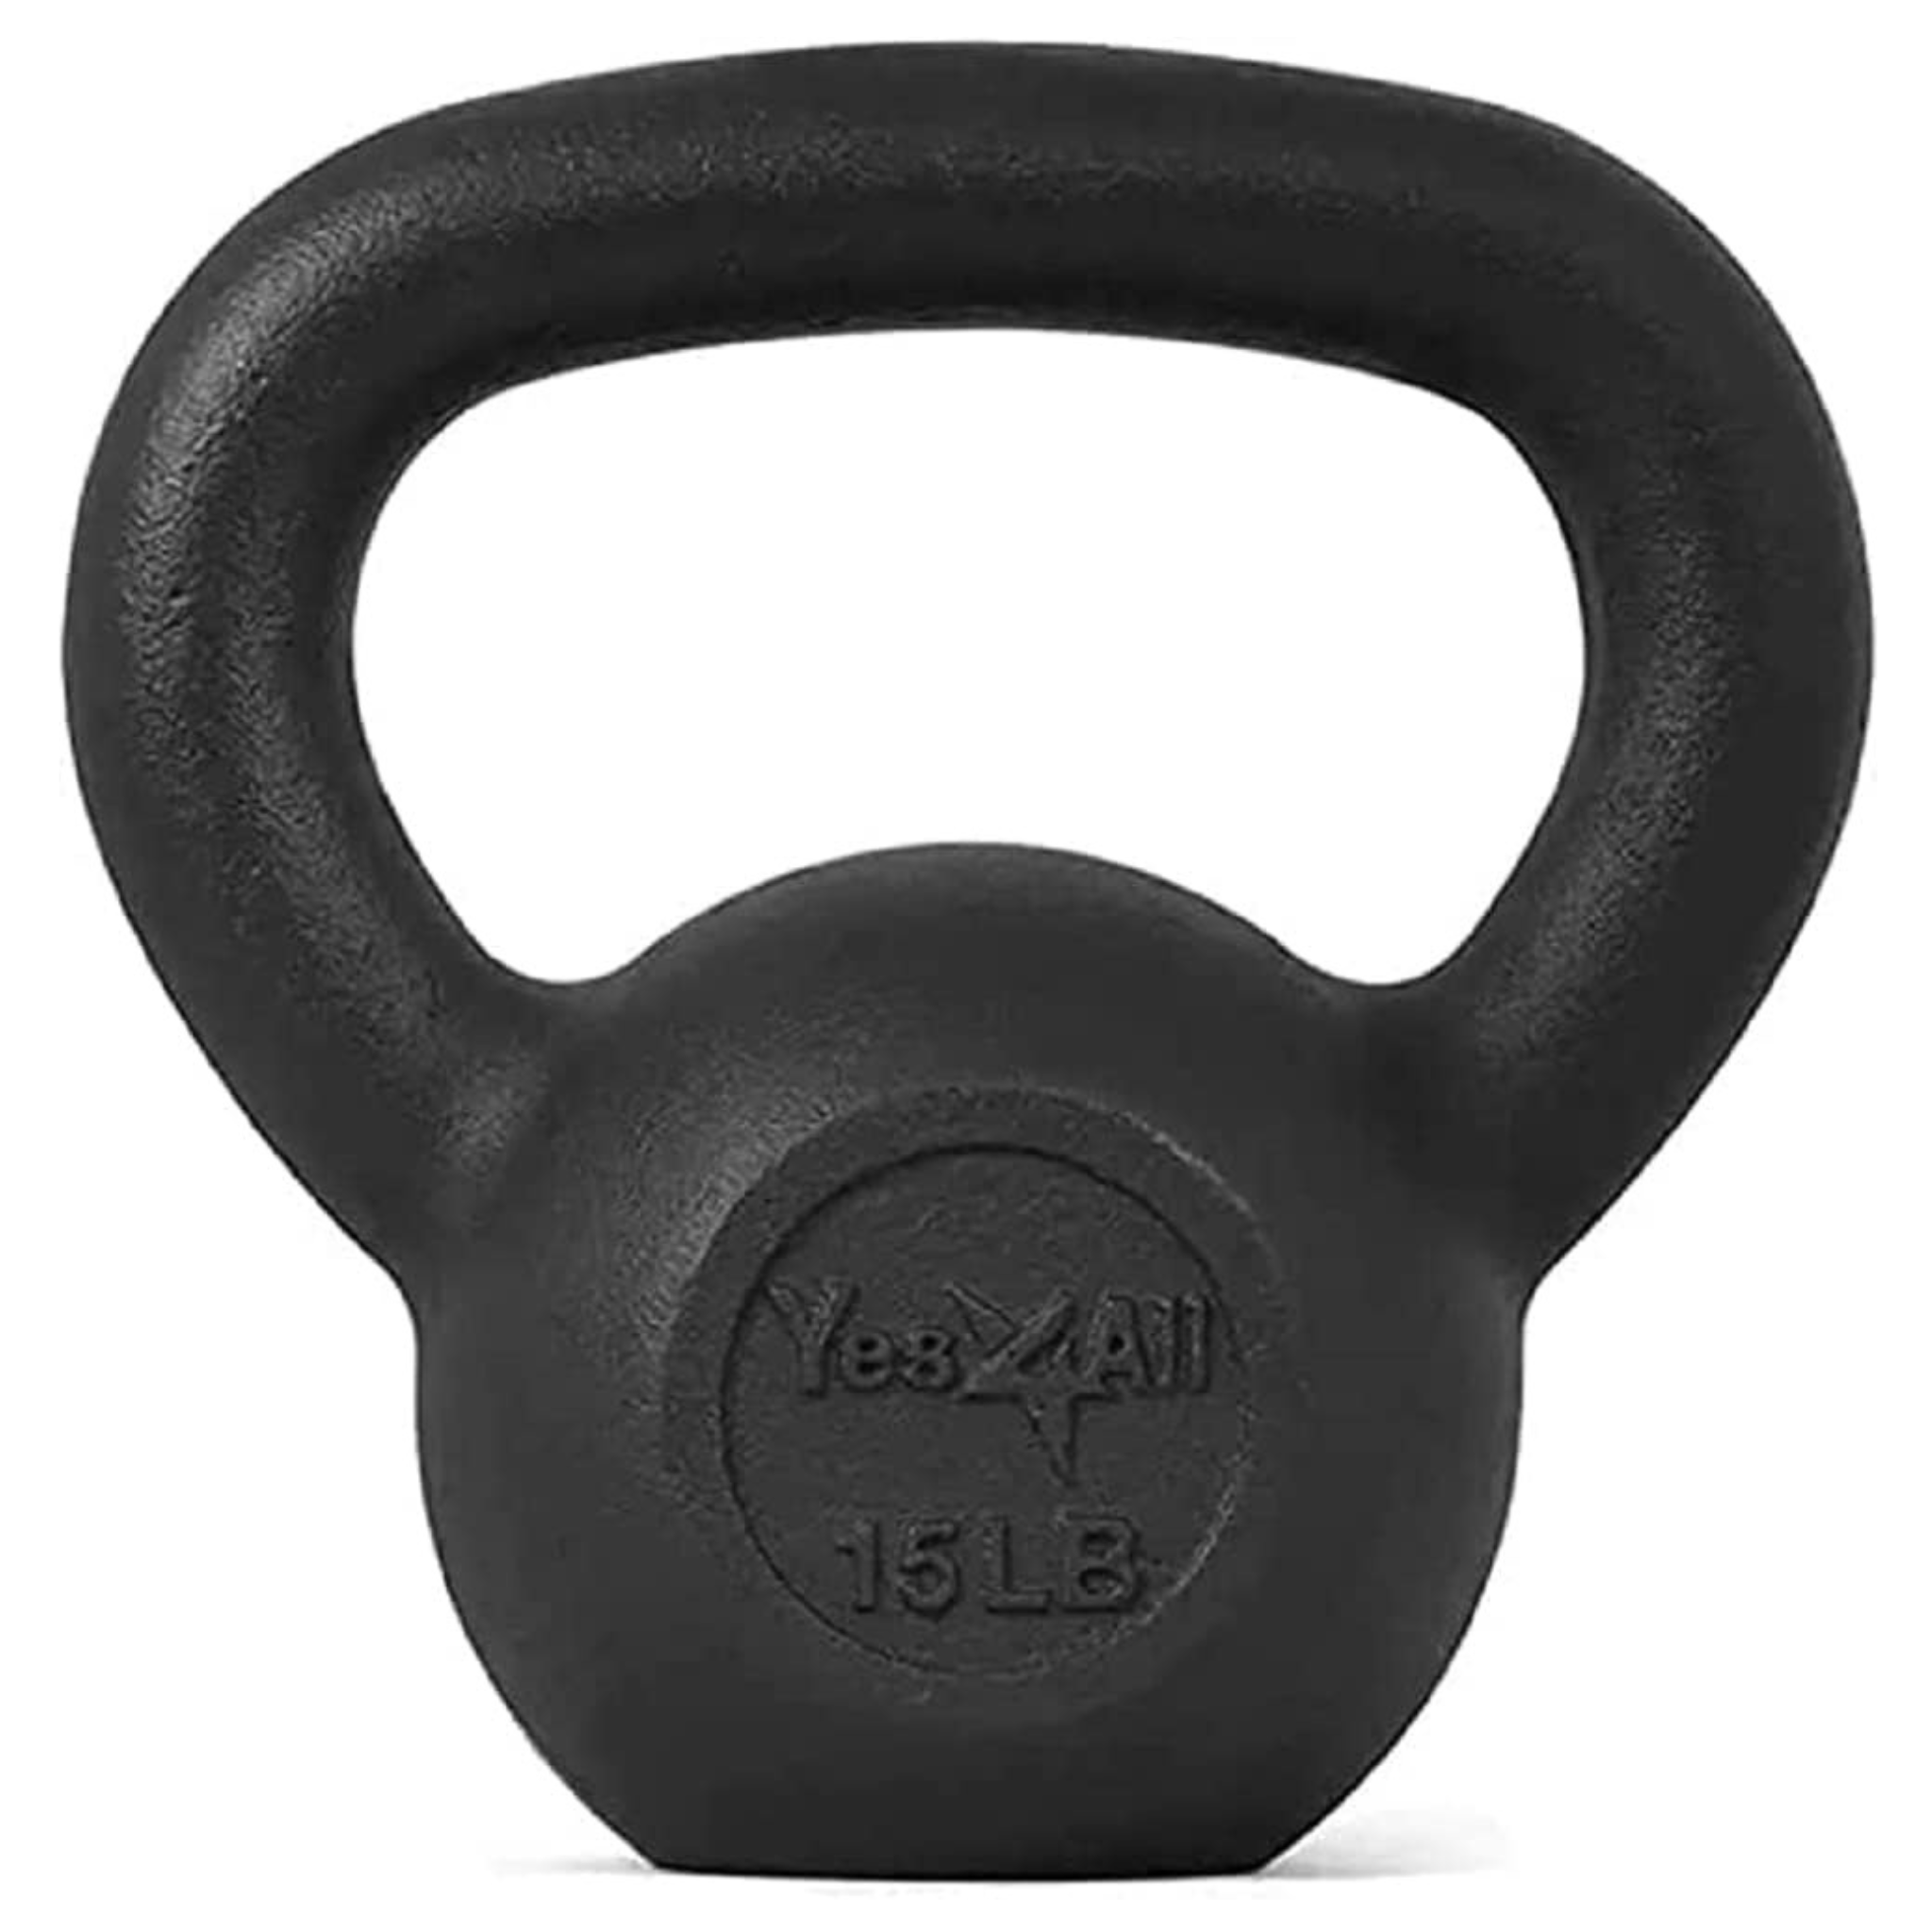 15-Lb Yes4All Cast Iron Kettlebell Weight